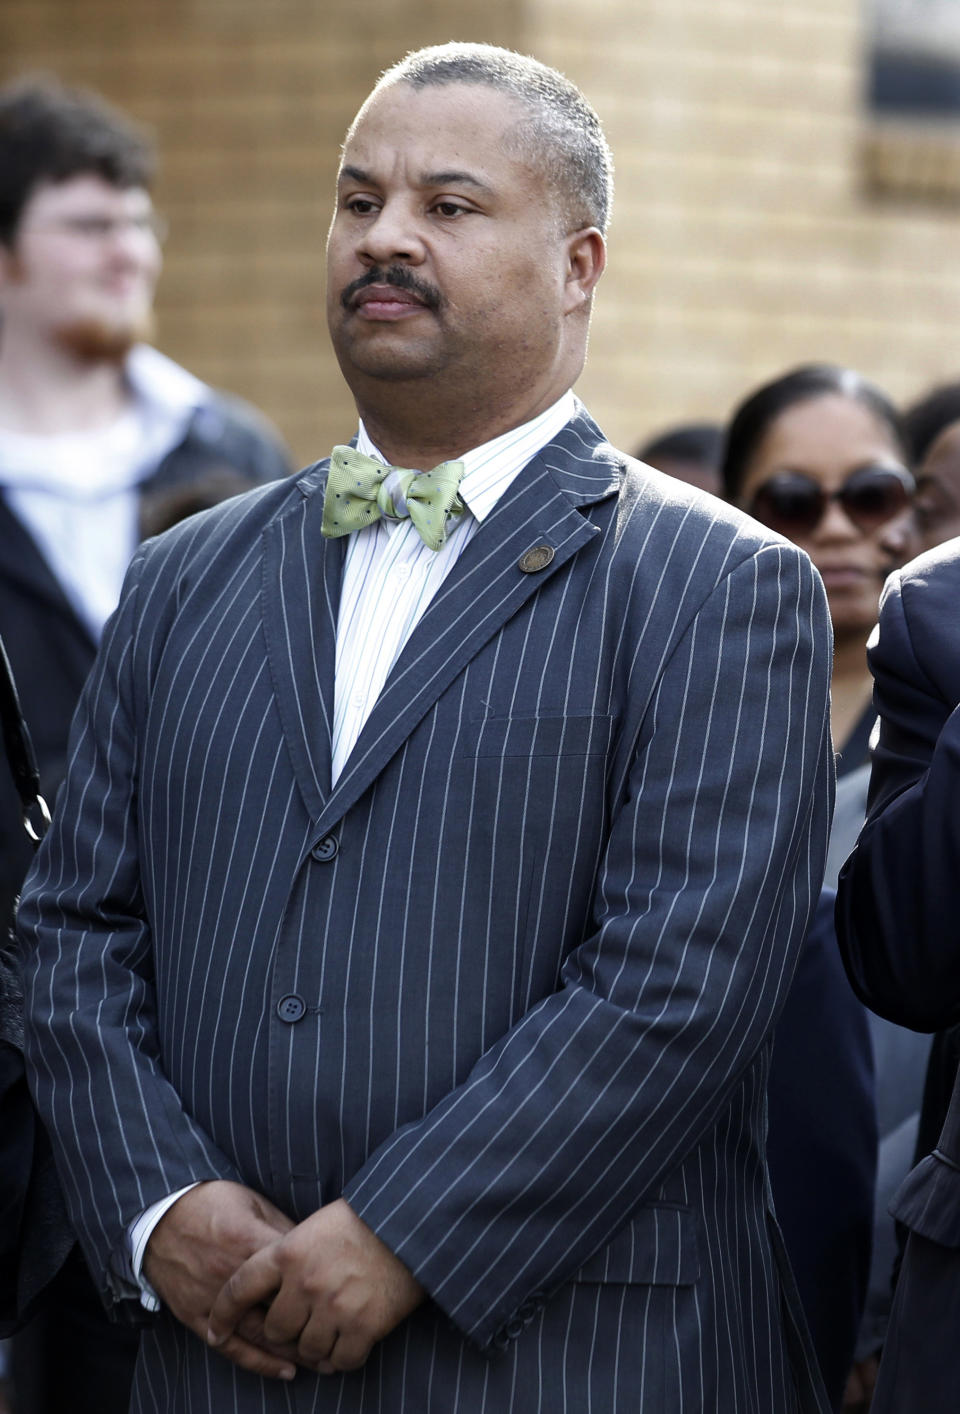 FILE - Donald Payne Jr. stands during the funeral of his father, New Jersey Congressman Donald Payne, in Newark, N.J., March 13, 2012. Payne Jr. of New Jersey died Wednesday, April 24, 2024, officials said, after suffering a heart attack earlier this month that had left him hospitalized. He was 65. (AP Photo/Julio Cortez, File)